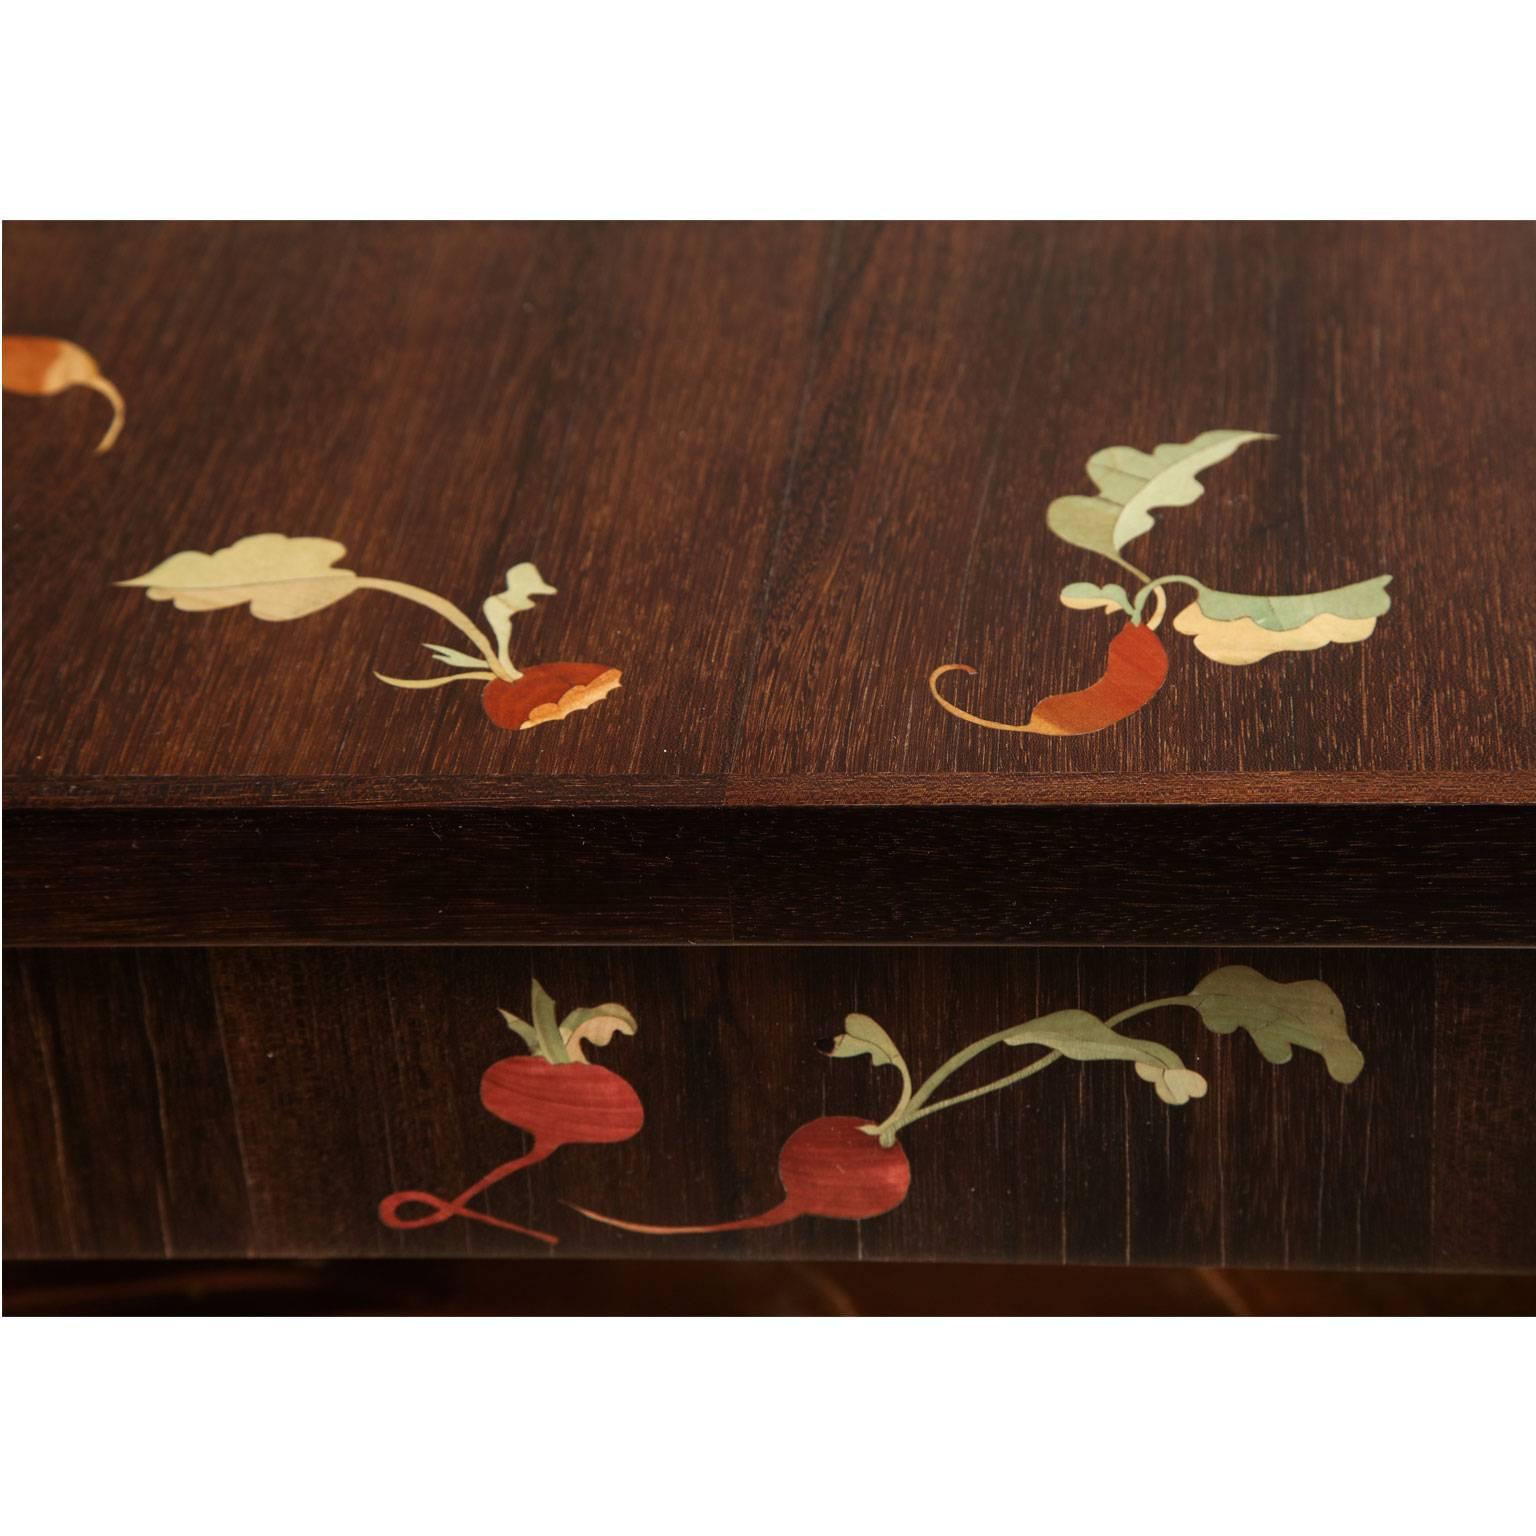 Marquetry Louis Cane Dining Table with Radishes